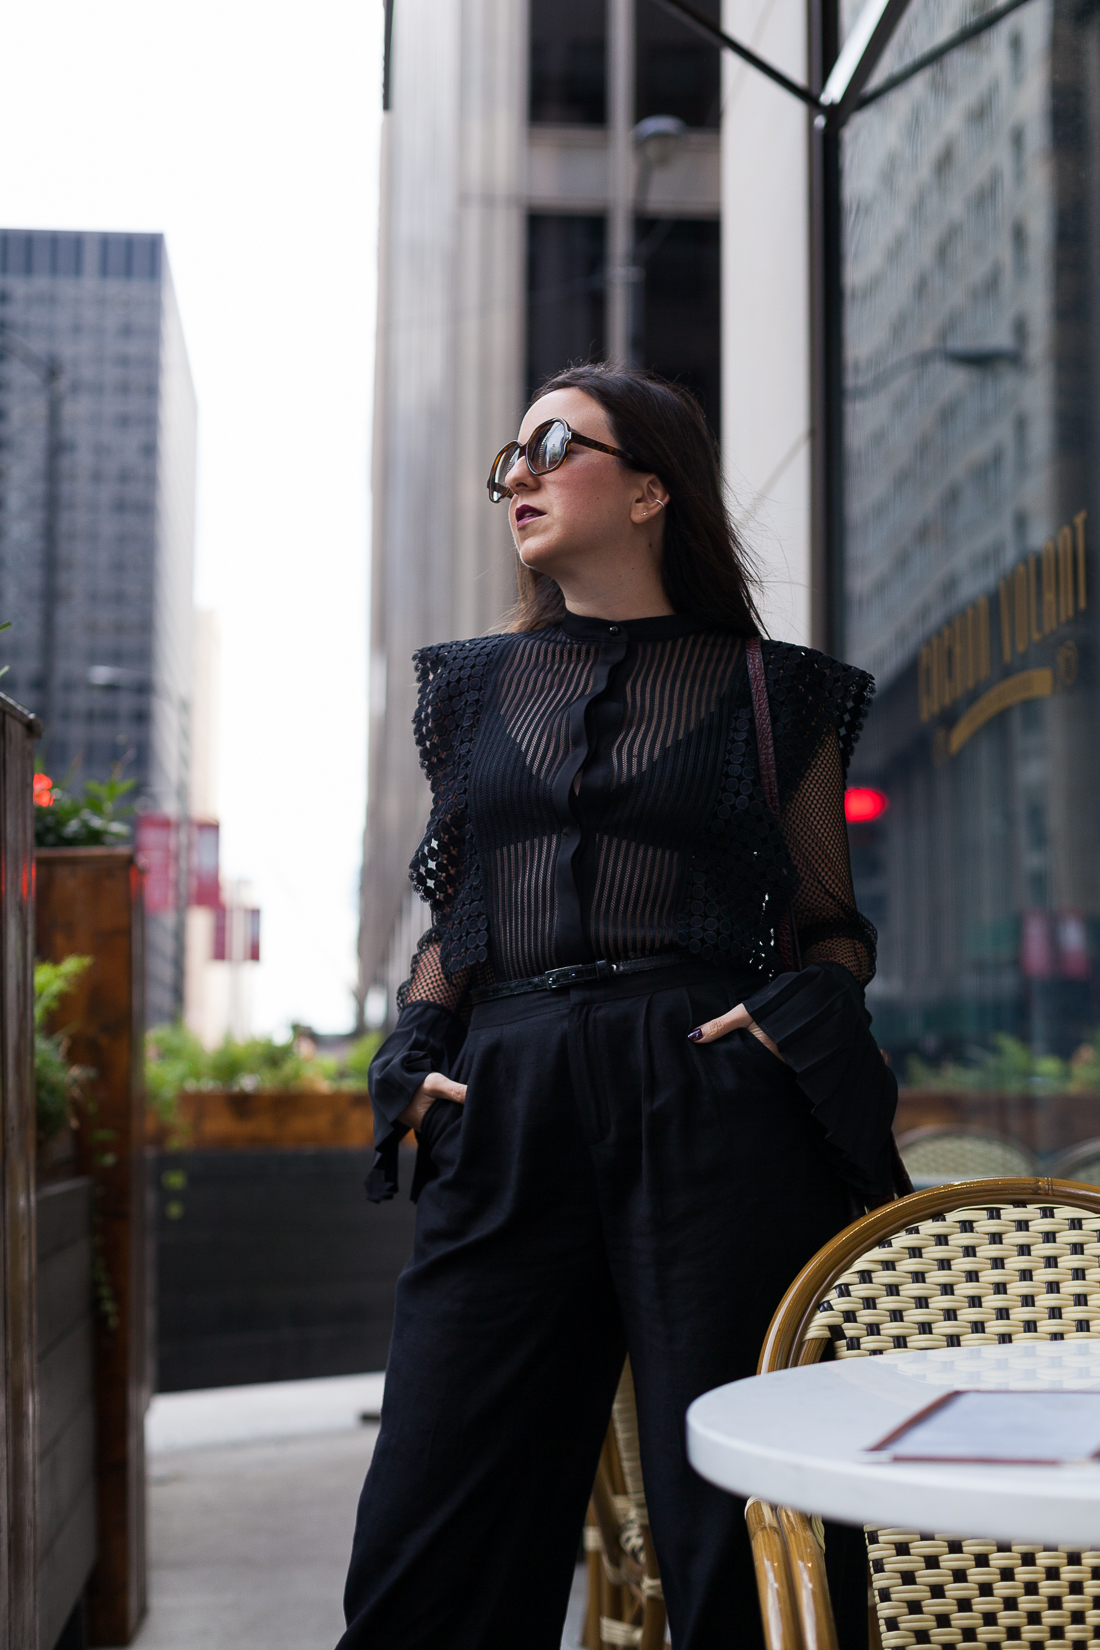 To Style a Sheer, Black Lace Top Nomad